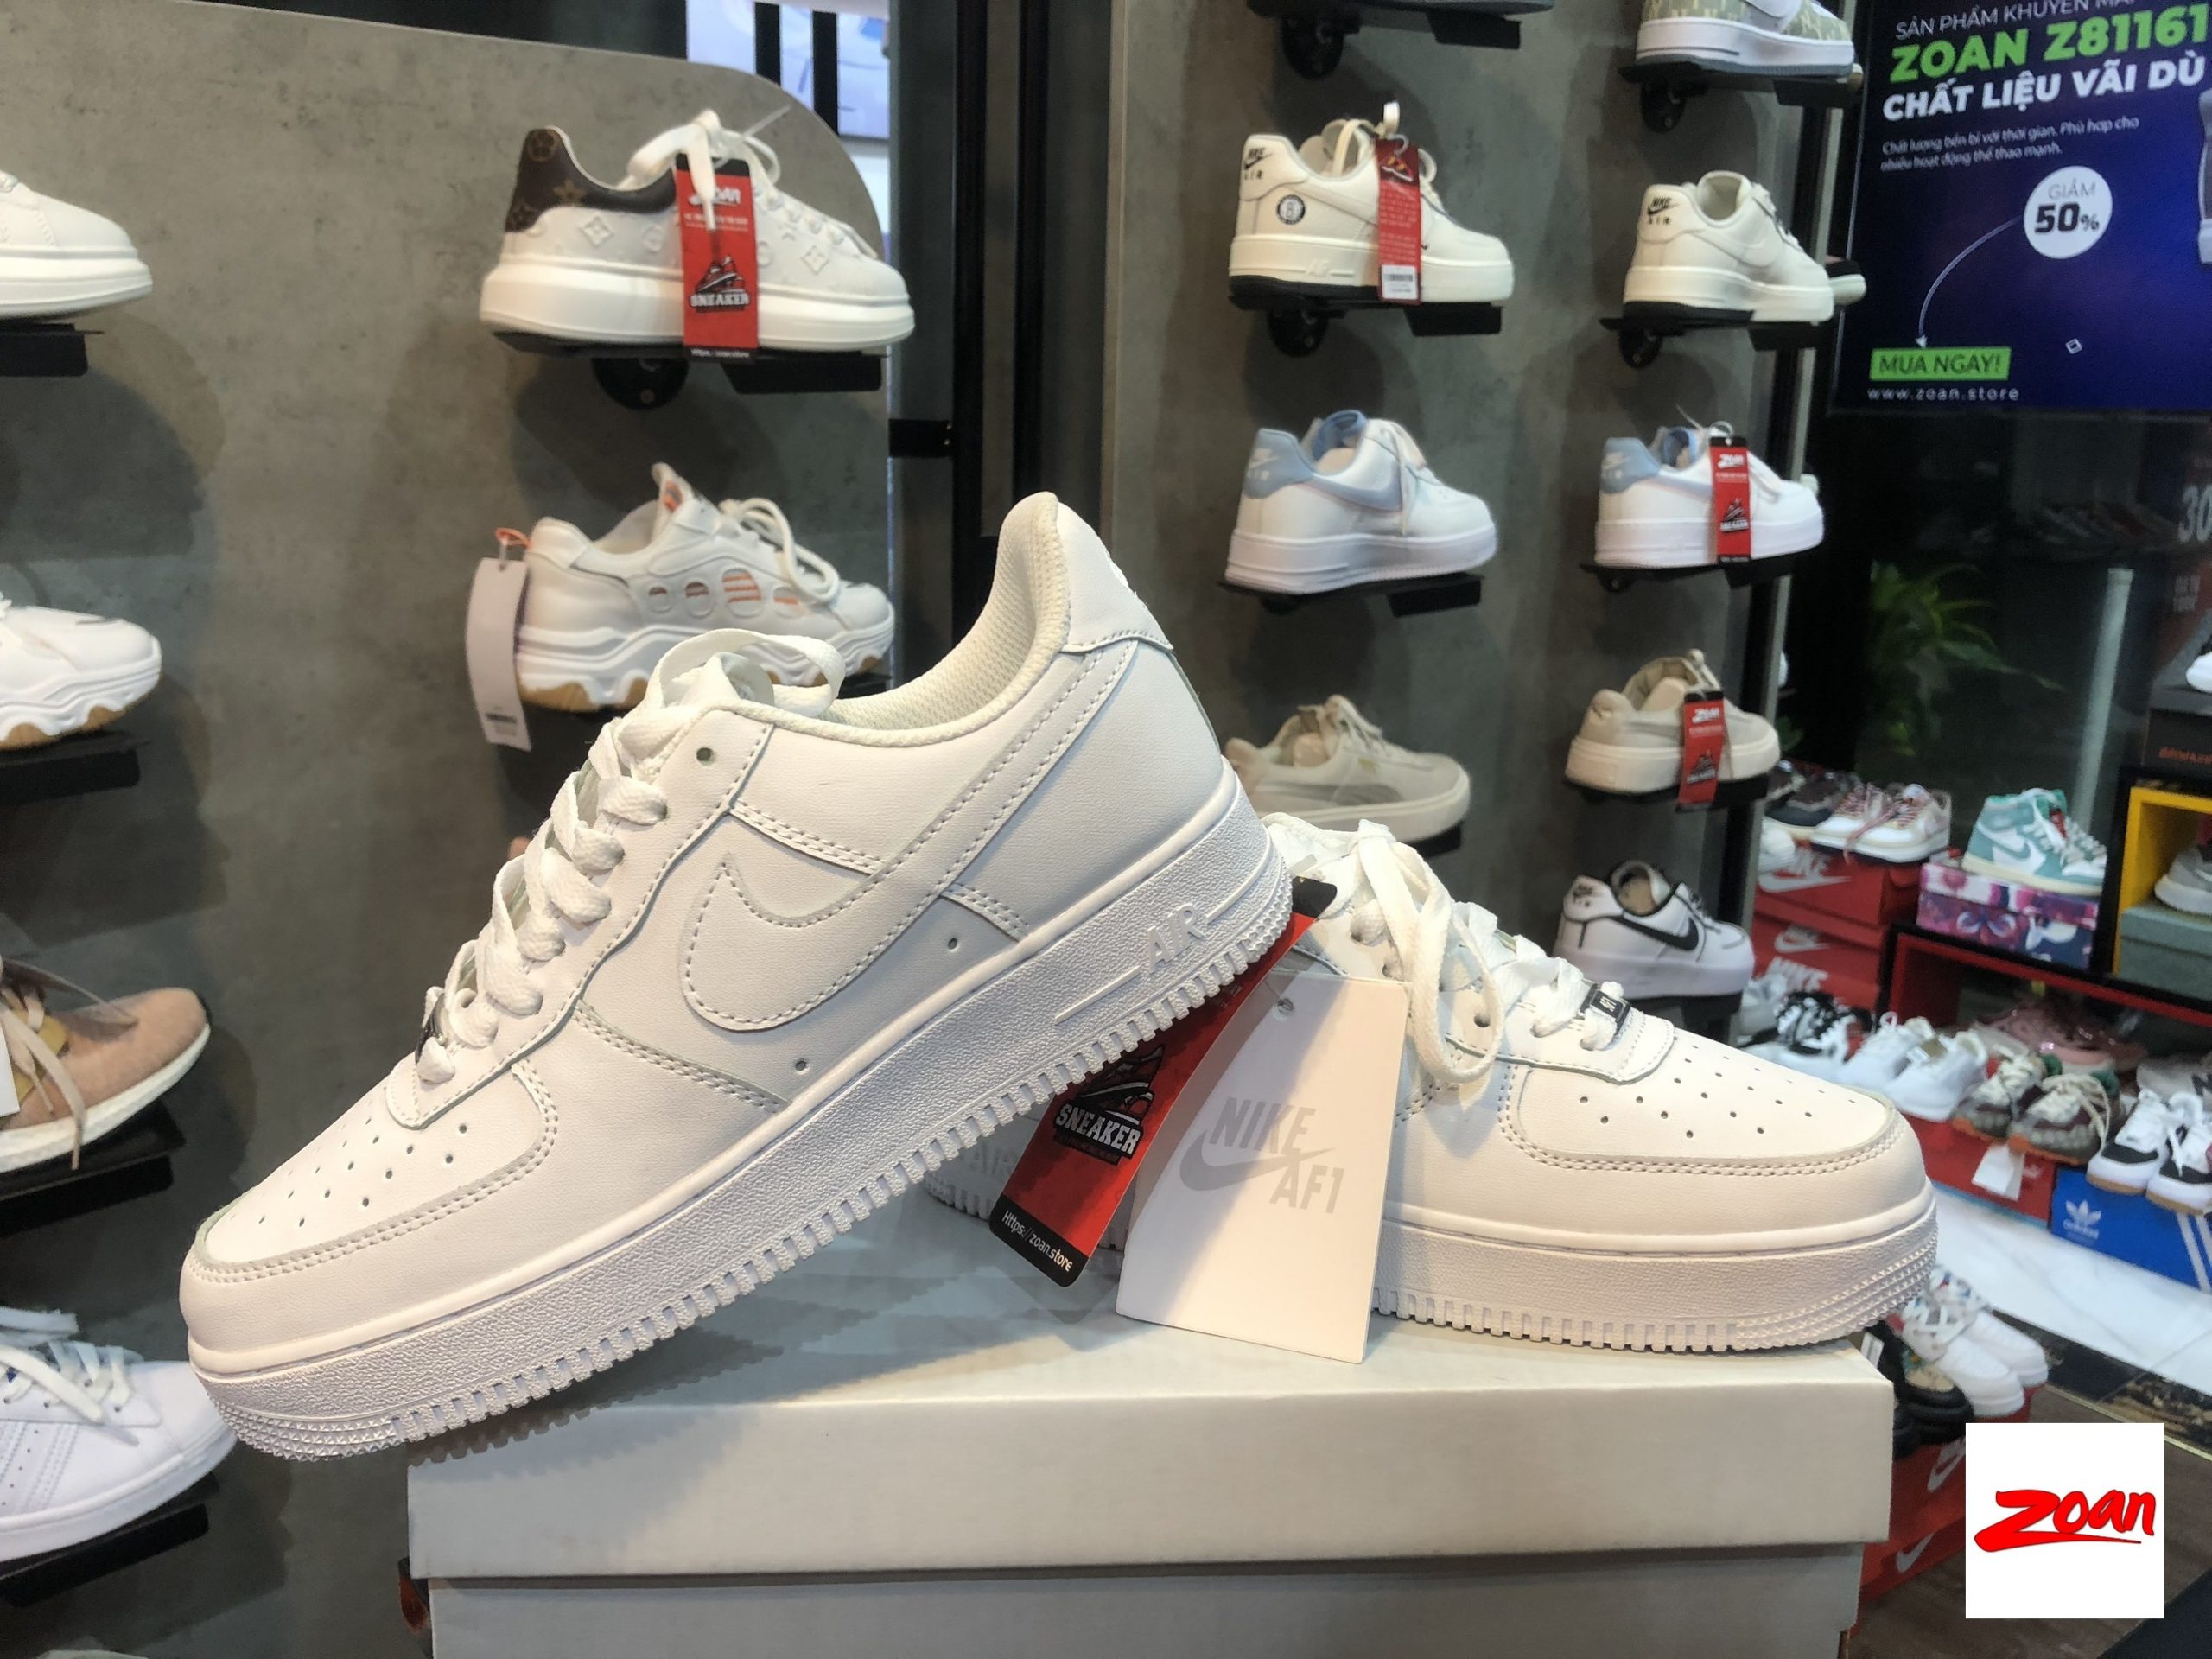 Nike trắng, giày Nike AF1 trắng, giày Nike Air Force 11 all white